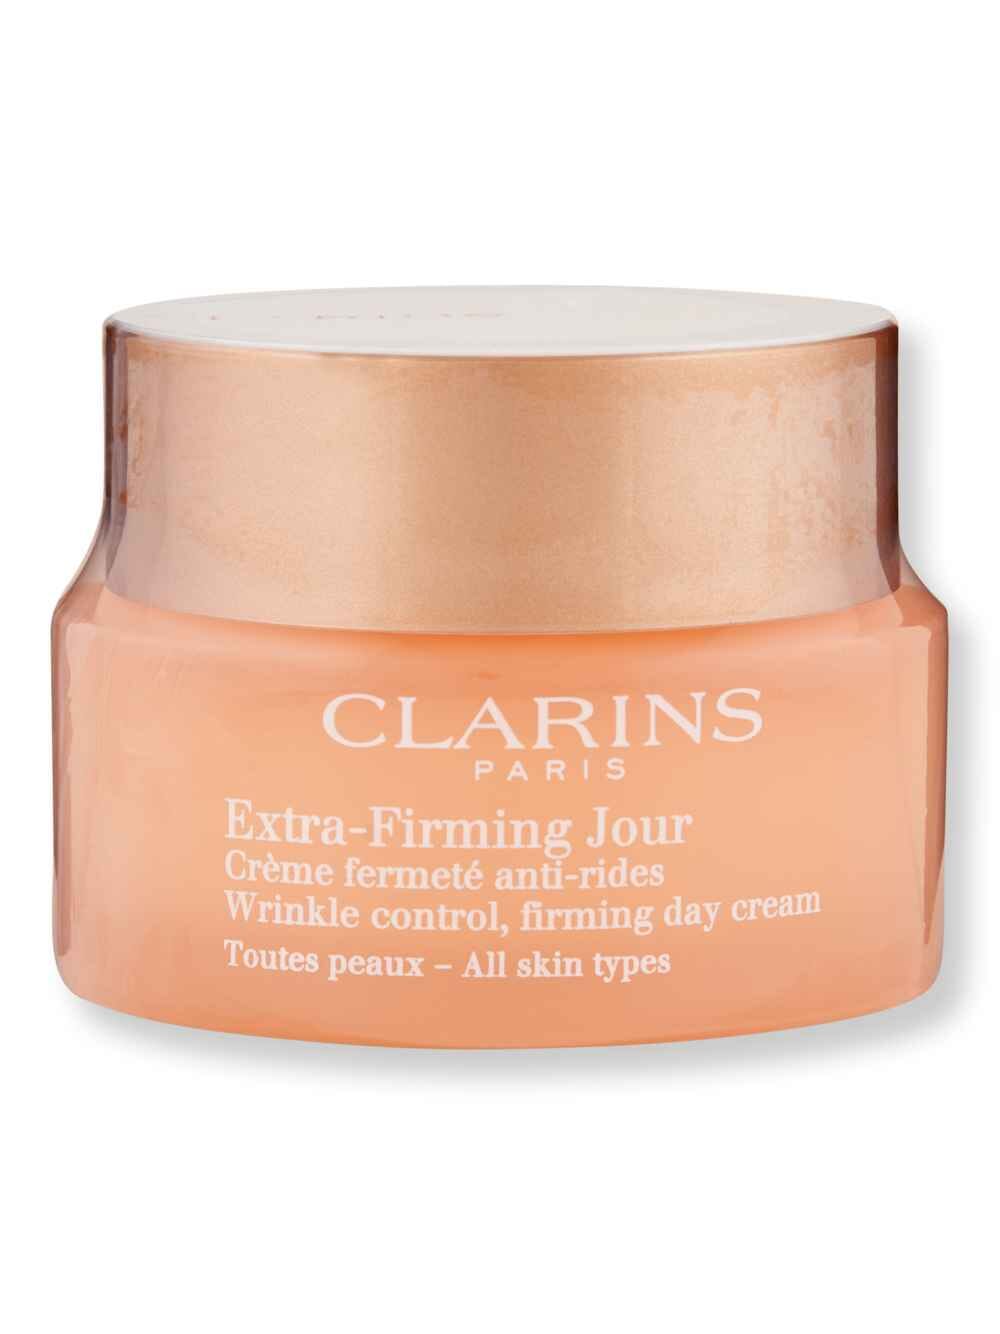 Clarins Clarins Extra-Firming Day Cream All Skin Types 1.7 oz50 ml Face Moisturizers 